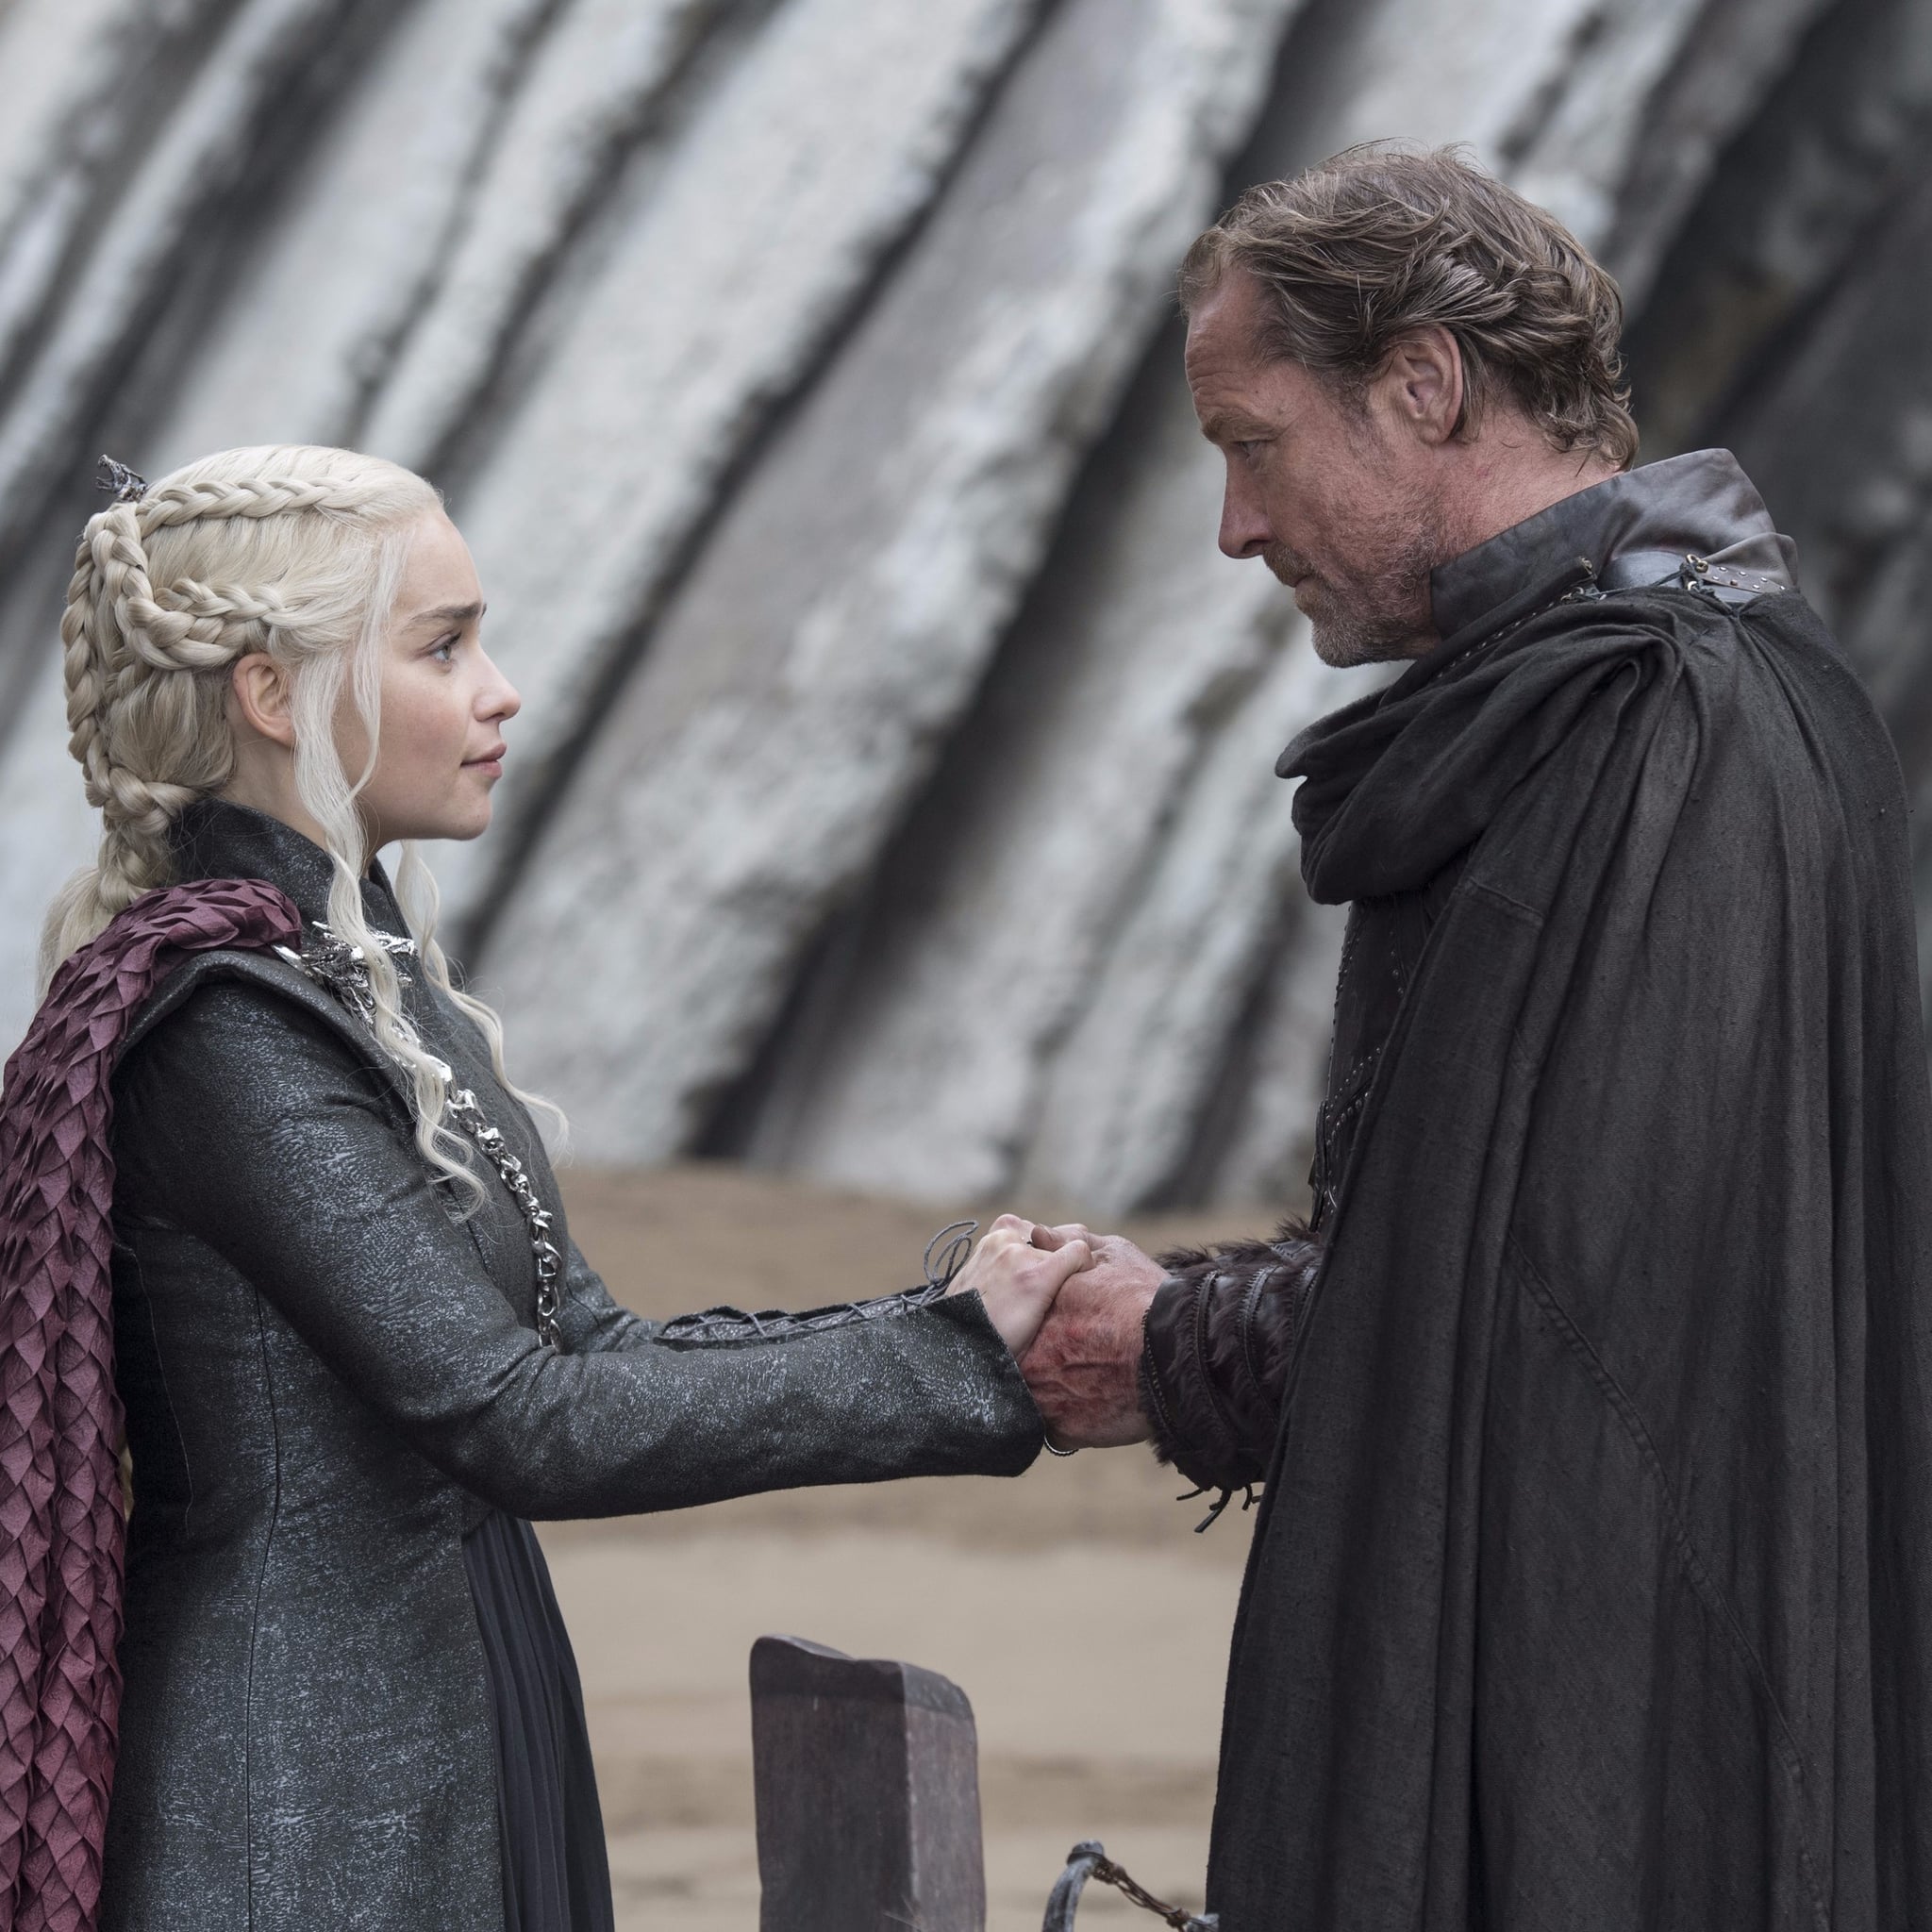 Reactions To Jorah And Daenerys Reunion On Game Of Thrones